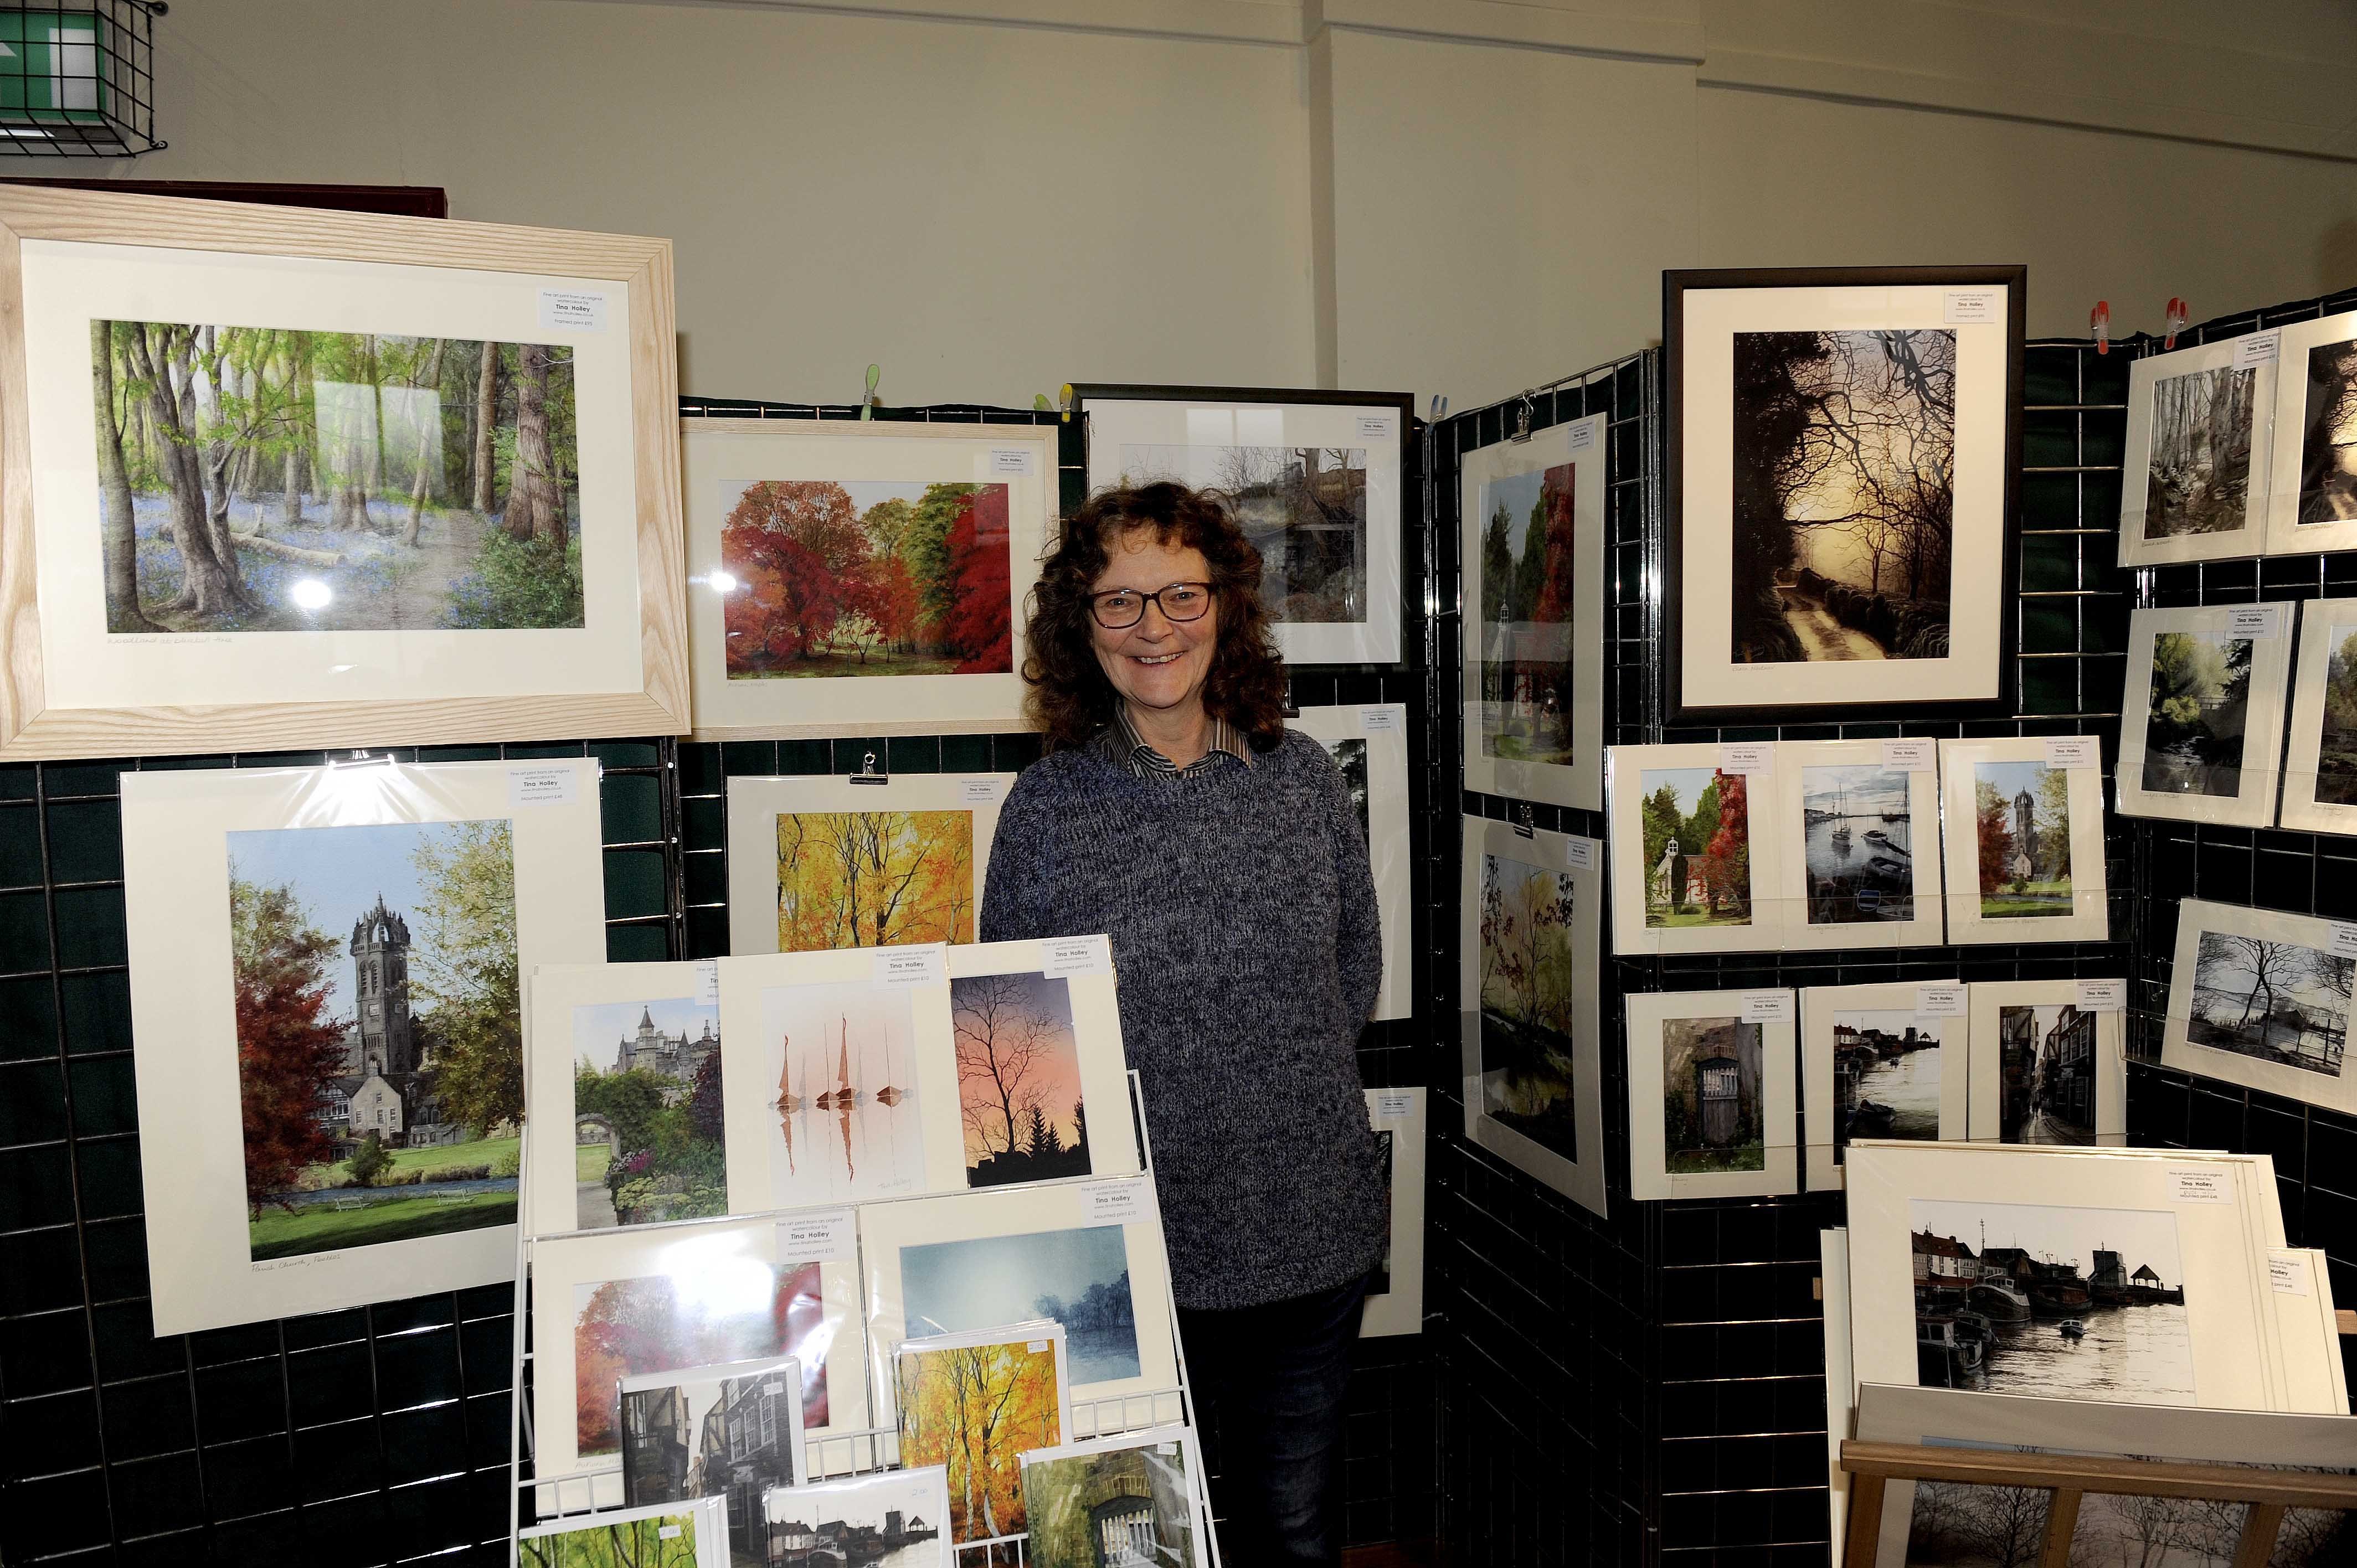 Photographer/artist Tina Holley at the Tweed Valley Forest Festival in Peebles.